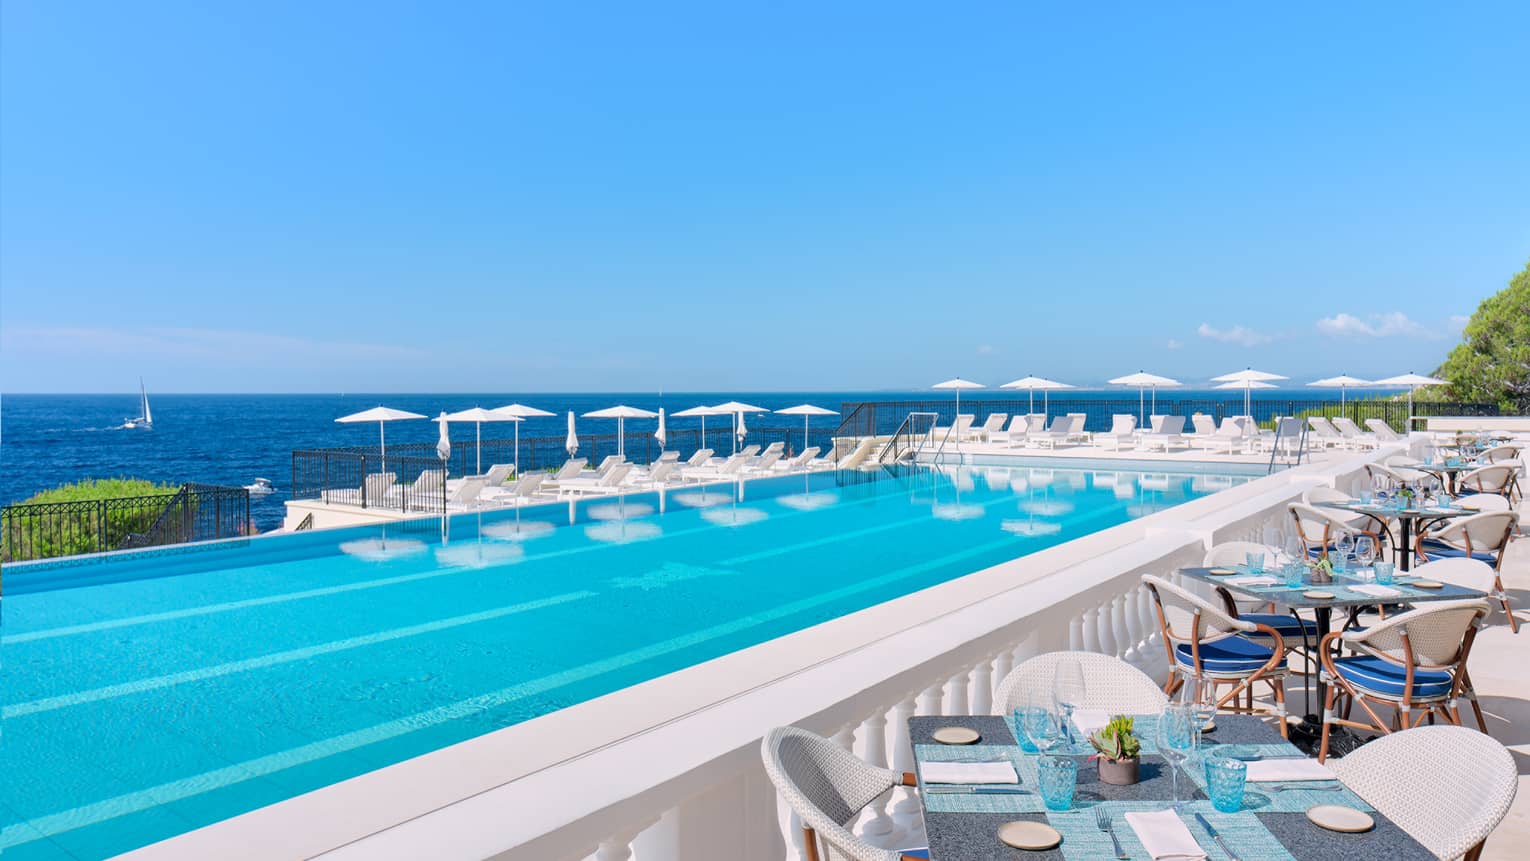 Mediterranean seafront infinity pool surrounded by white tables, lounge chairs, and umbrellas